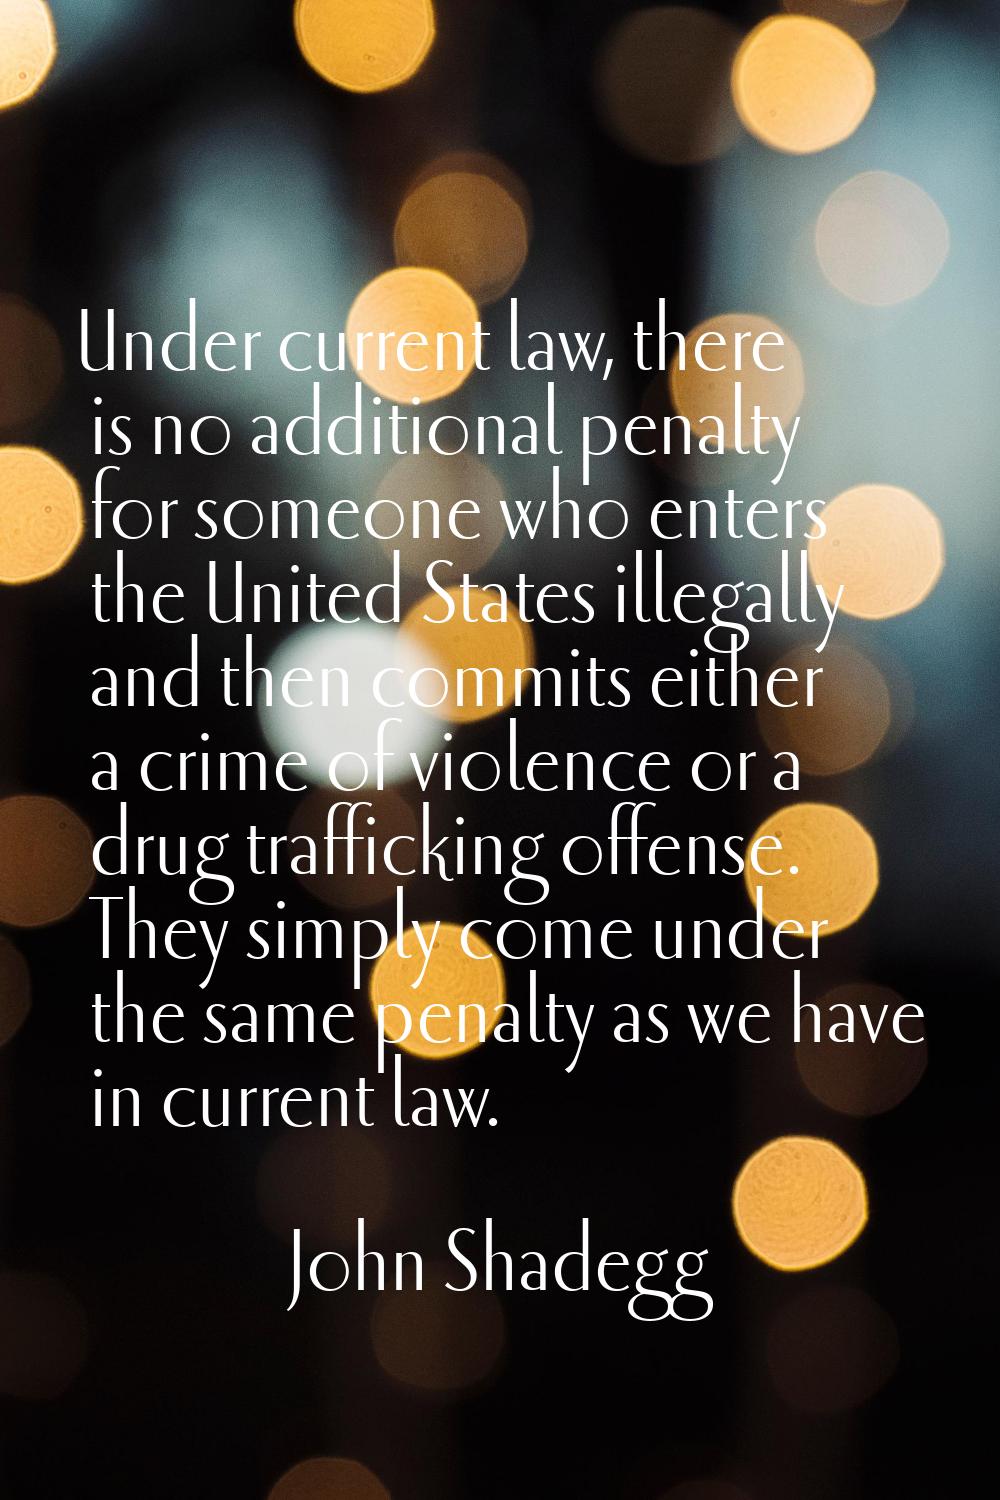 Under current law, there is no additional penalty for someone who enters the United States illegall